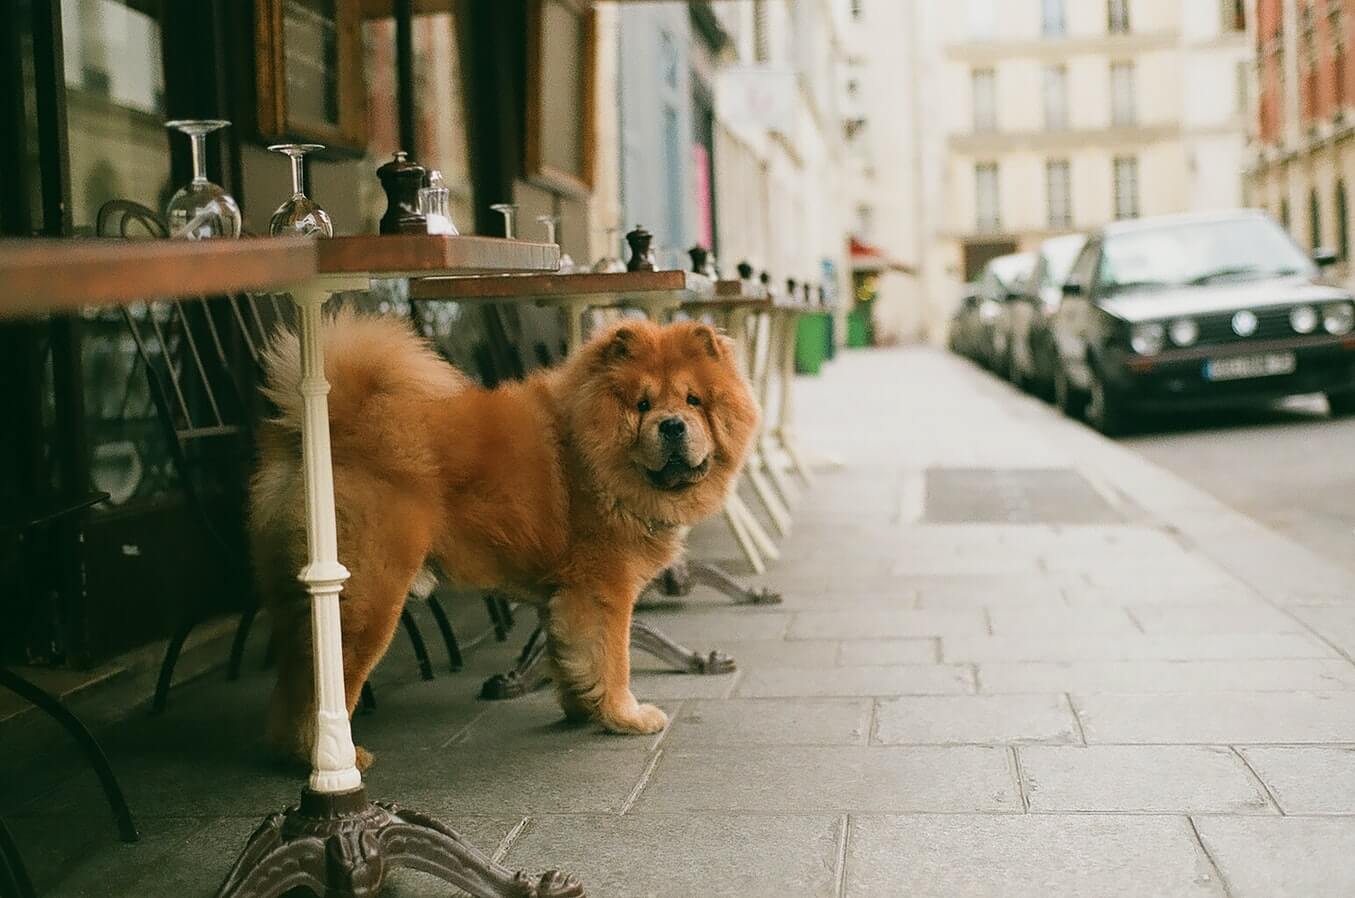 Dog under a table